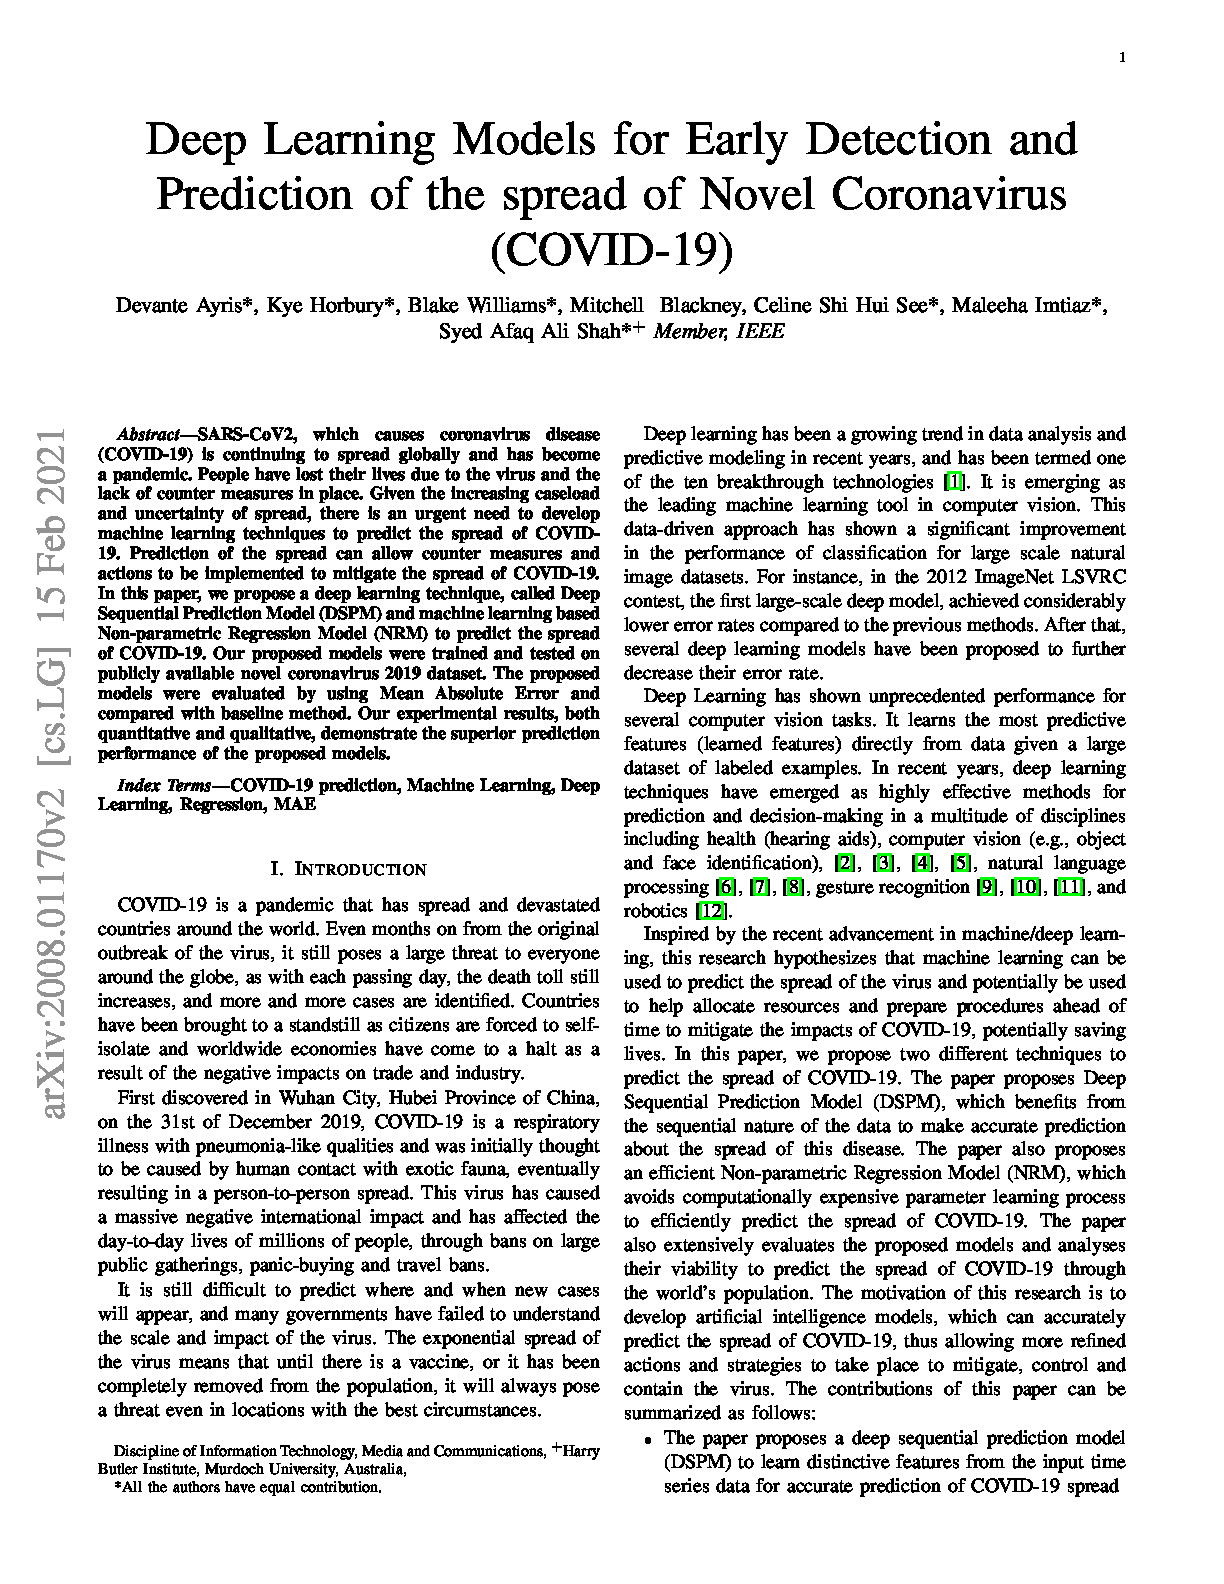 Deep Learning Models for Early Detection and Prediction of the spread of Novel Coronavirus(COVID-19) – 2008.01170v2